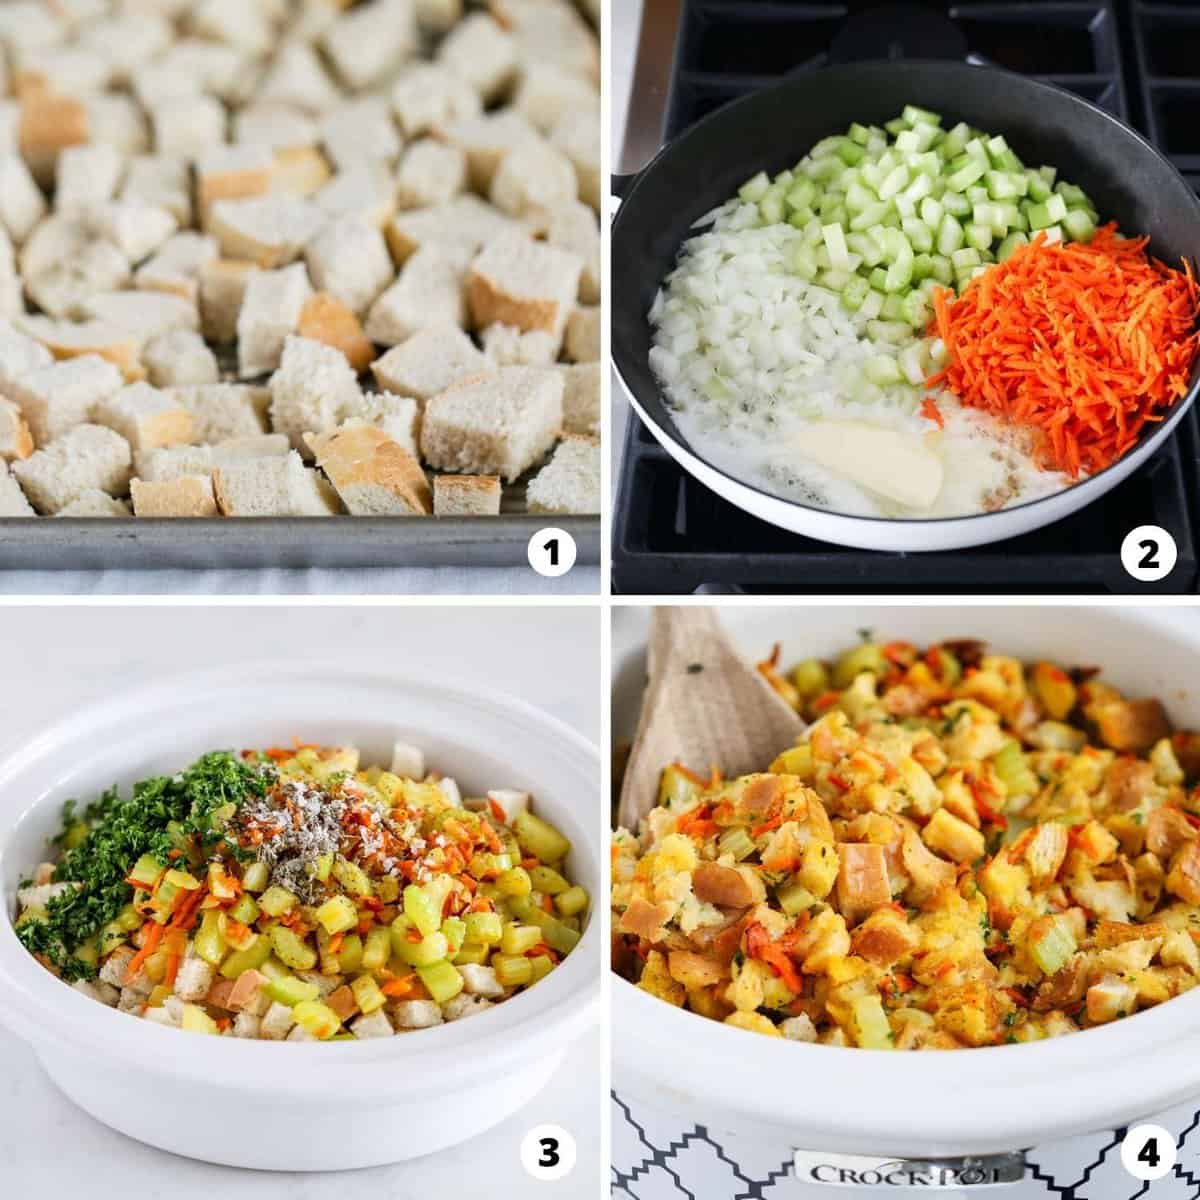 Showing how to make crockpot stuffing in a 4 step collage.